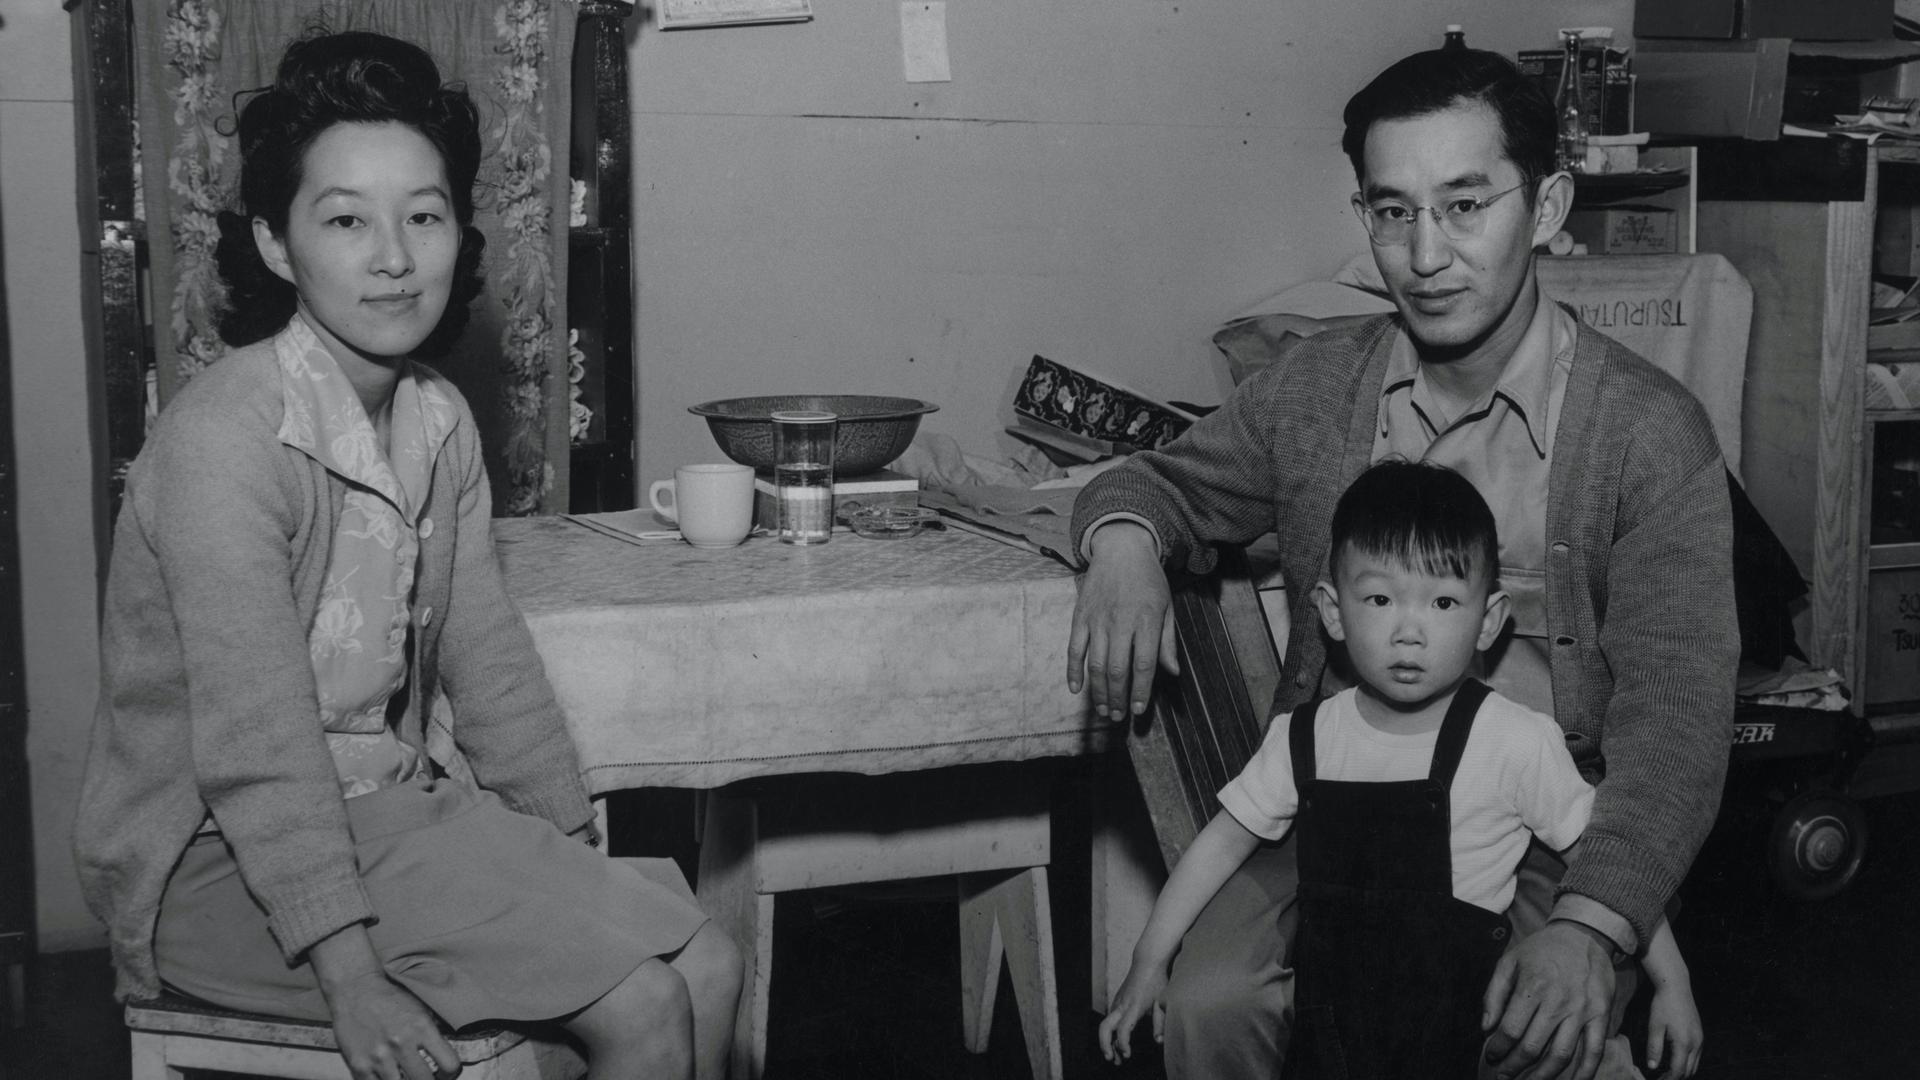 A black and white photo of a Japanese family (woman, man, child) sitting in a kitchen setting.